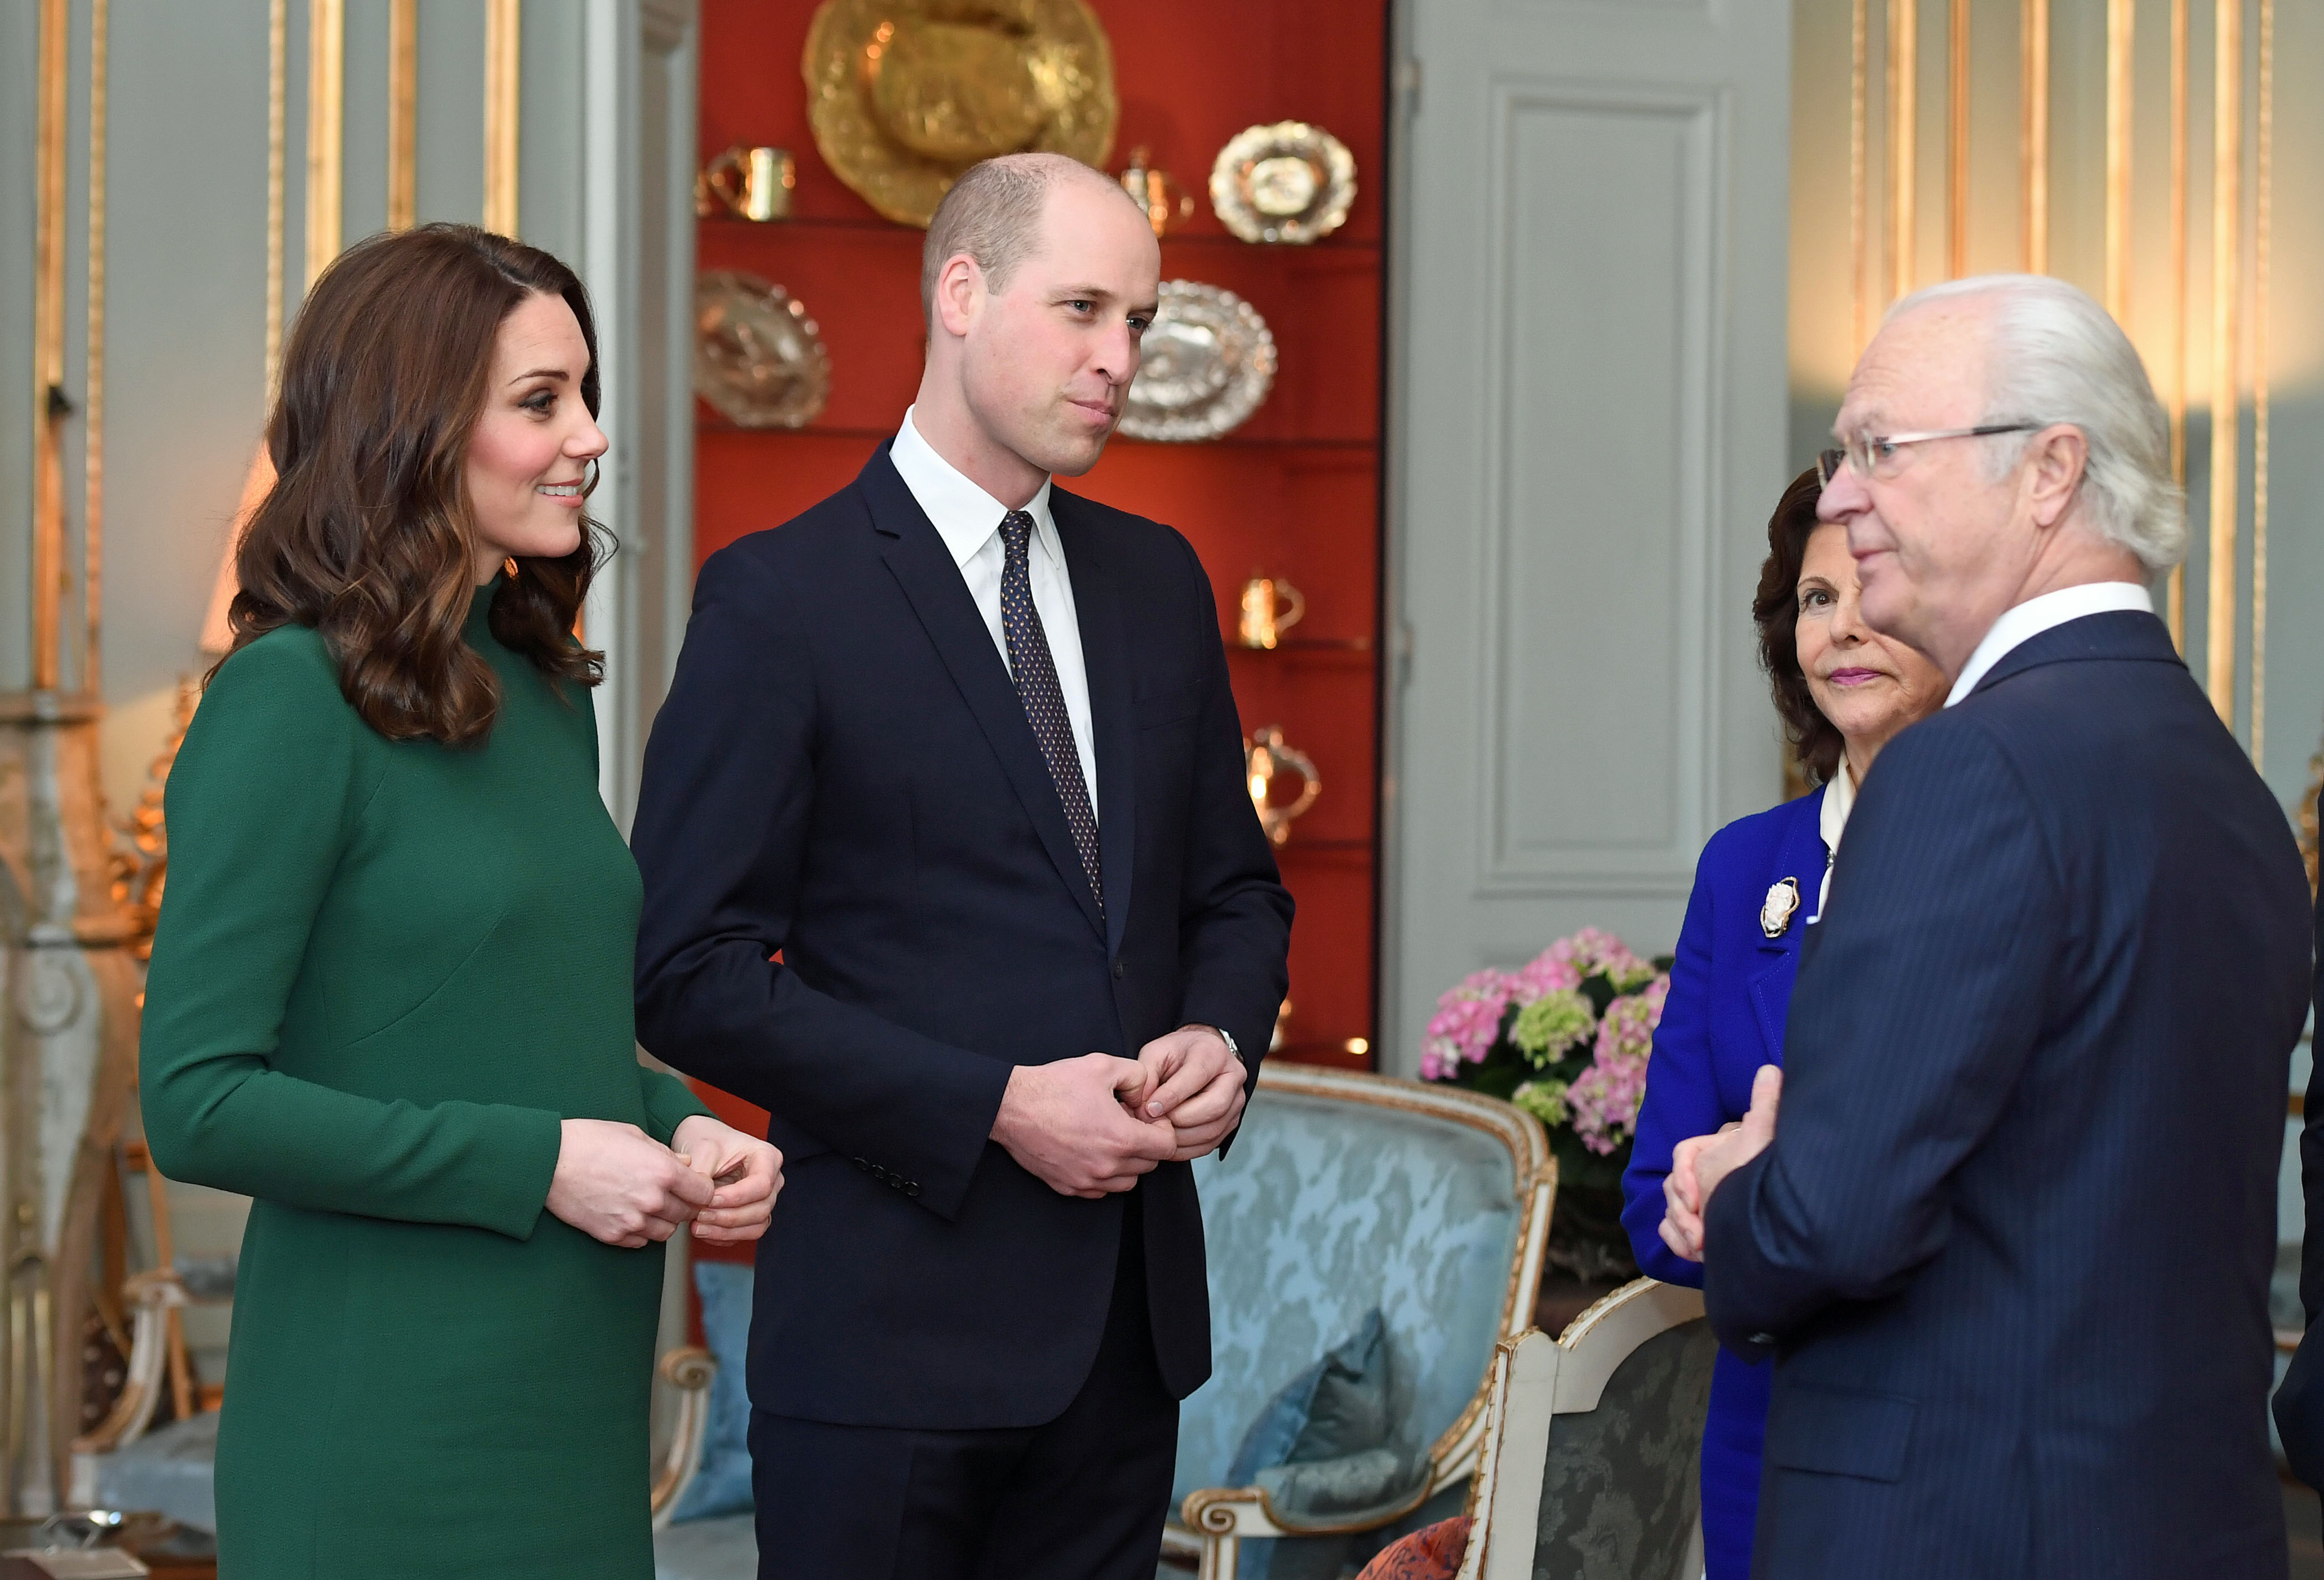 STOCKHOLM, SWEDEN - JANUARY 30: Catherine, Duchess of Cambridge and Prince William, Duke of Cambridge are greeted by King Carl XVI Gustaf of Sweden, Queen Silvia of Sweden ahead of a lunch at the Royal Palace of Stockholm during day one of their Royal visit to Sweden on January 30, 2018 in Stockholm, Sweden. (Photo by Victoria Jones-Pool/Getty Images) (Pool—Getty Images)